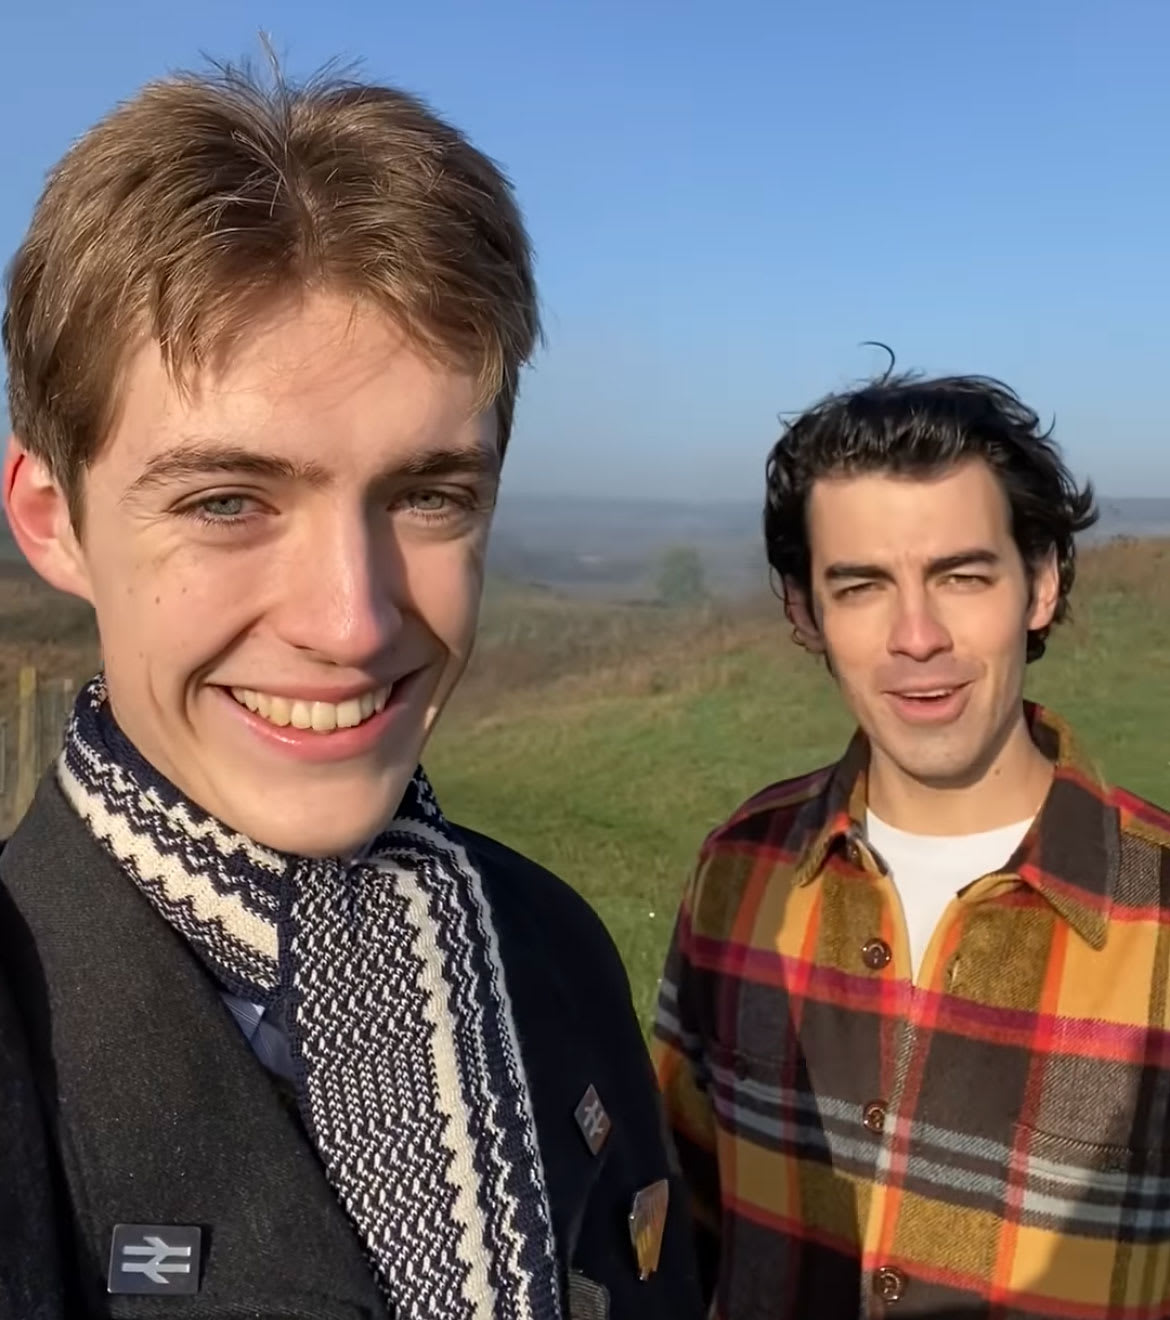 Joe Jonas goes trainspotting with TikTok creator Francis Bourgeois in an unexpected collab